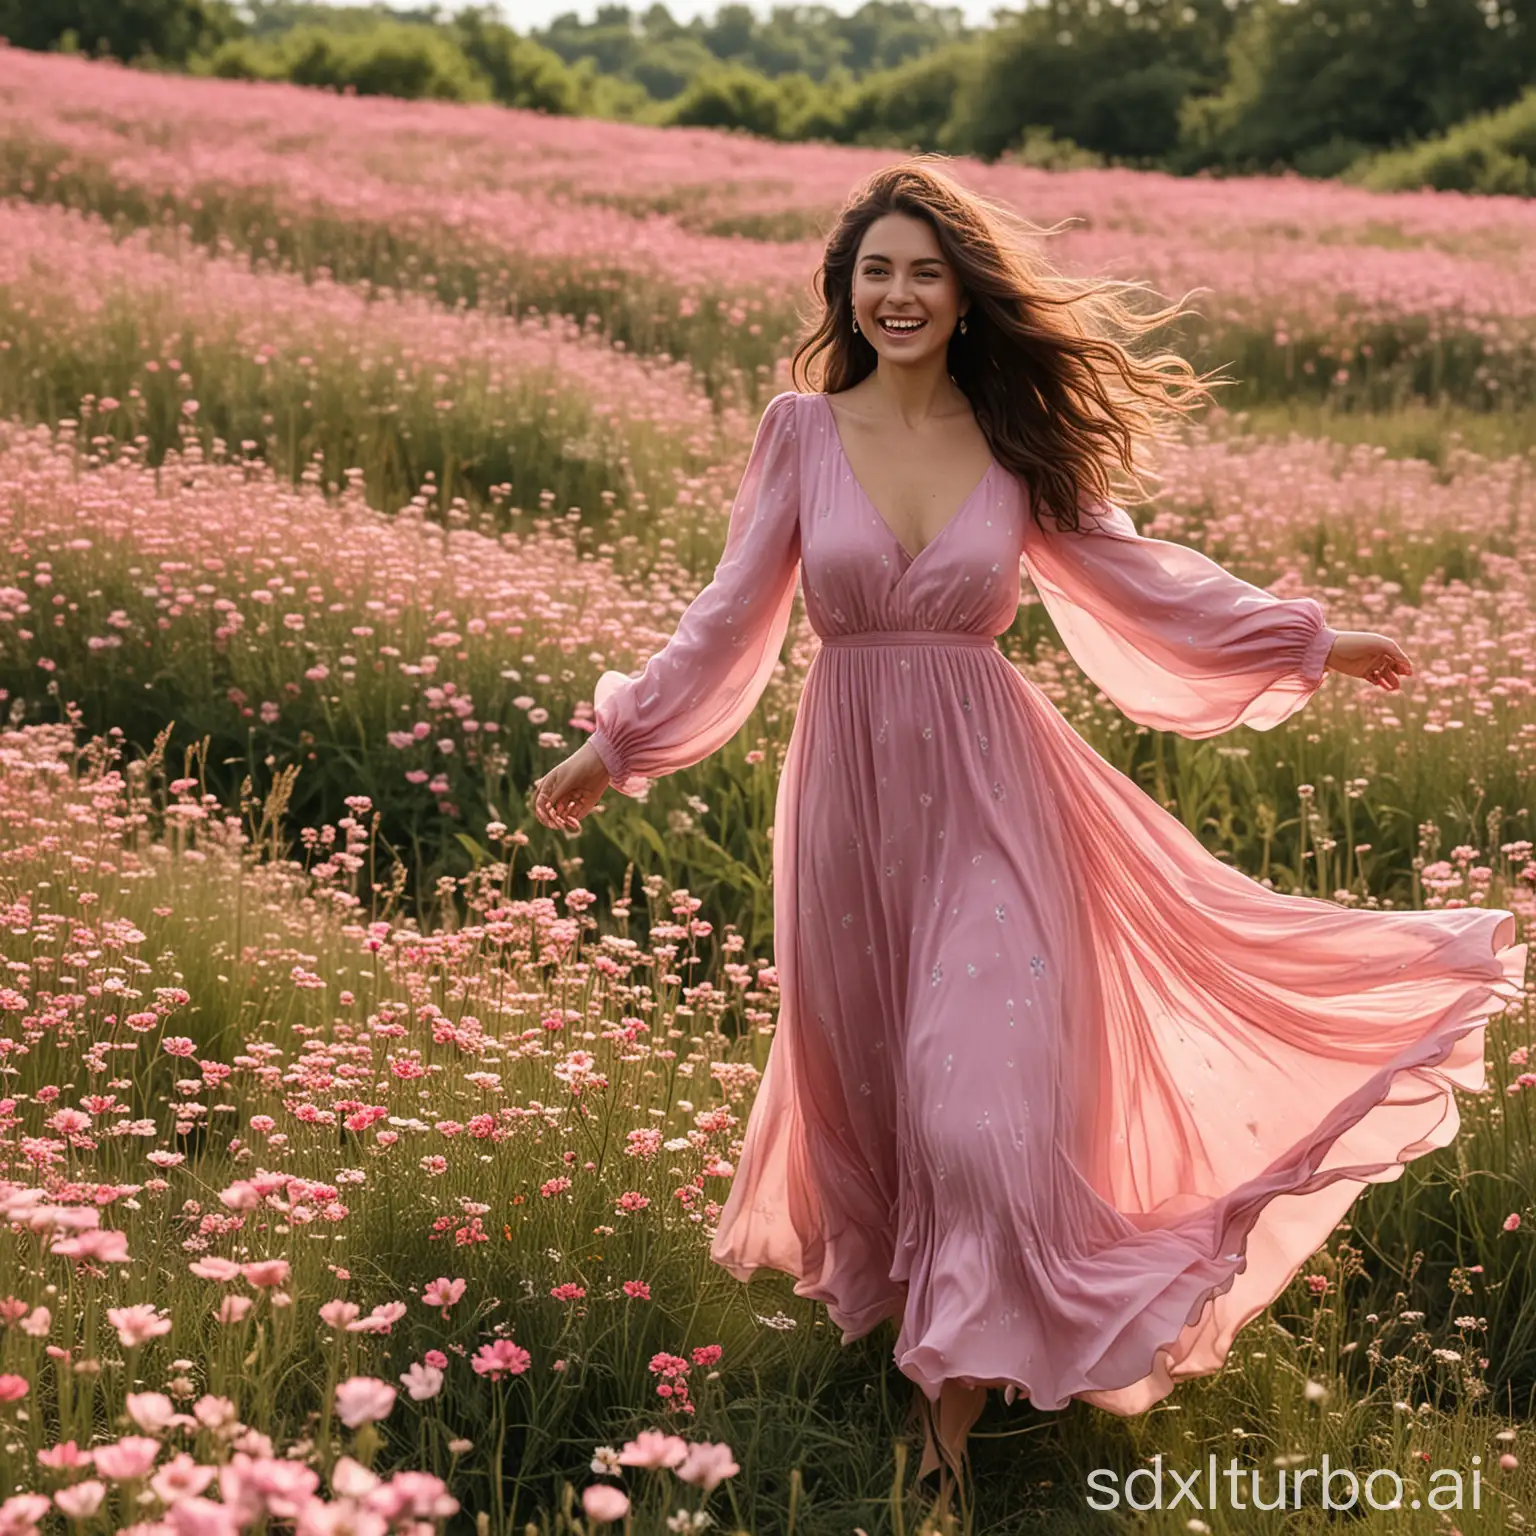 A woman wearing a flowy, pink dress is walking through a field of flowers. The dress is made of a lightweight material and has a V-neckline and a flared skirt. The woman's hair is flowing in the wind and she is smiling happily.